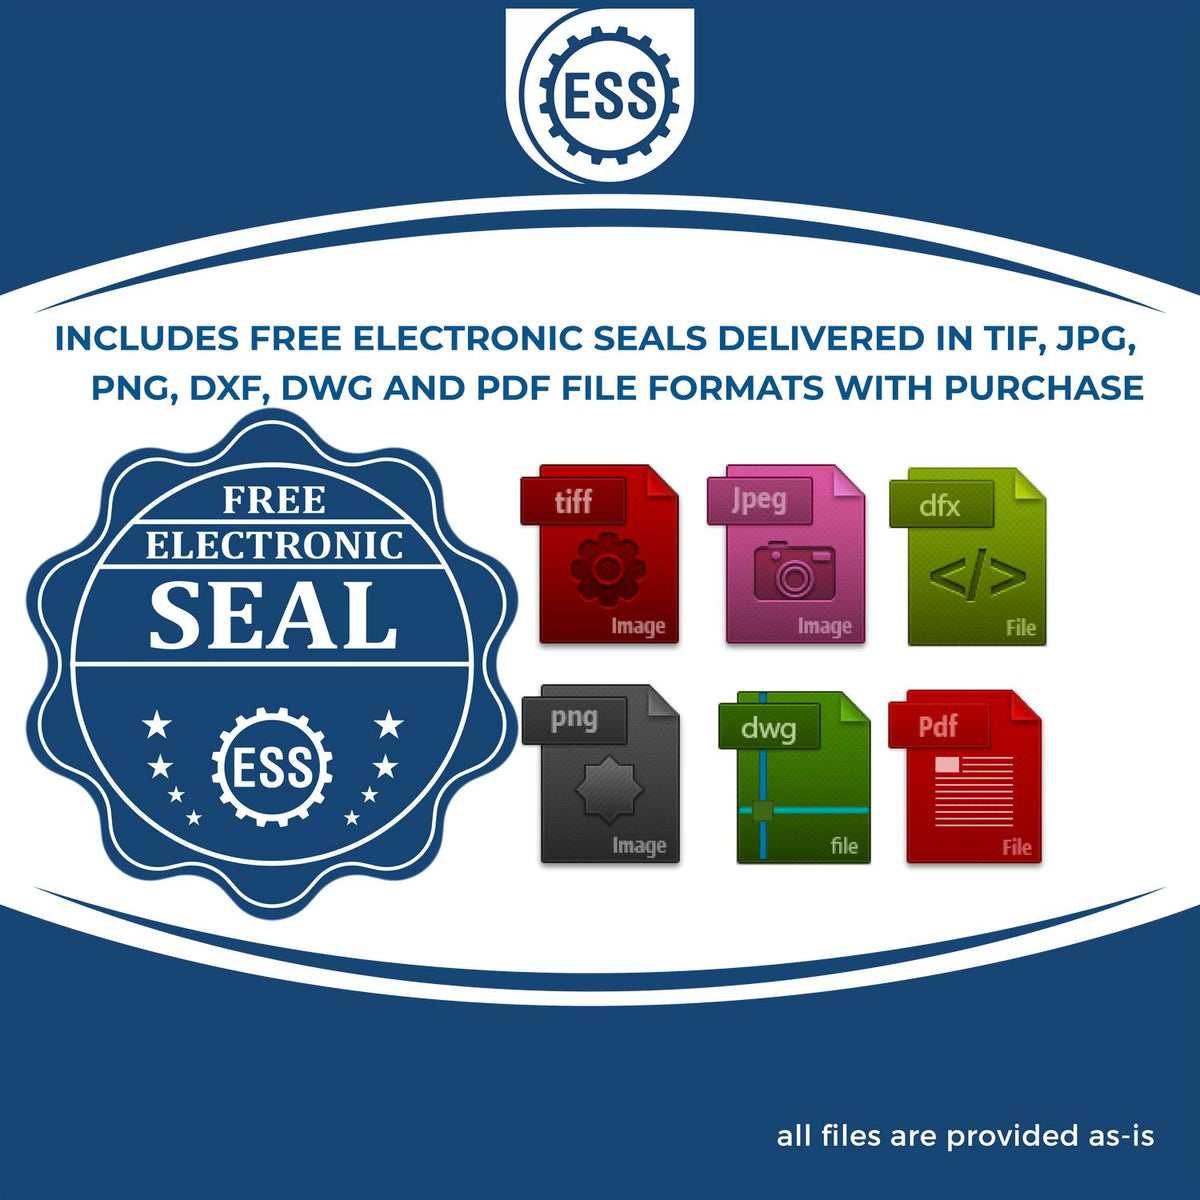 An infographic for the free electronic seal for the Slim Pre-Inked State Seal Notary Stamp for Delaware illustrating the different file type icons such as DXF, DWG, TIF, JPG and PNG.